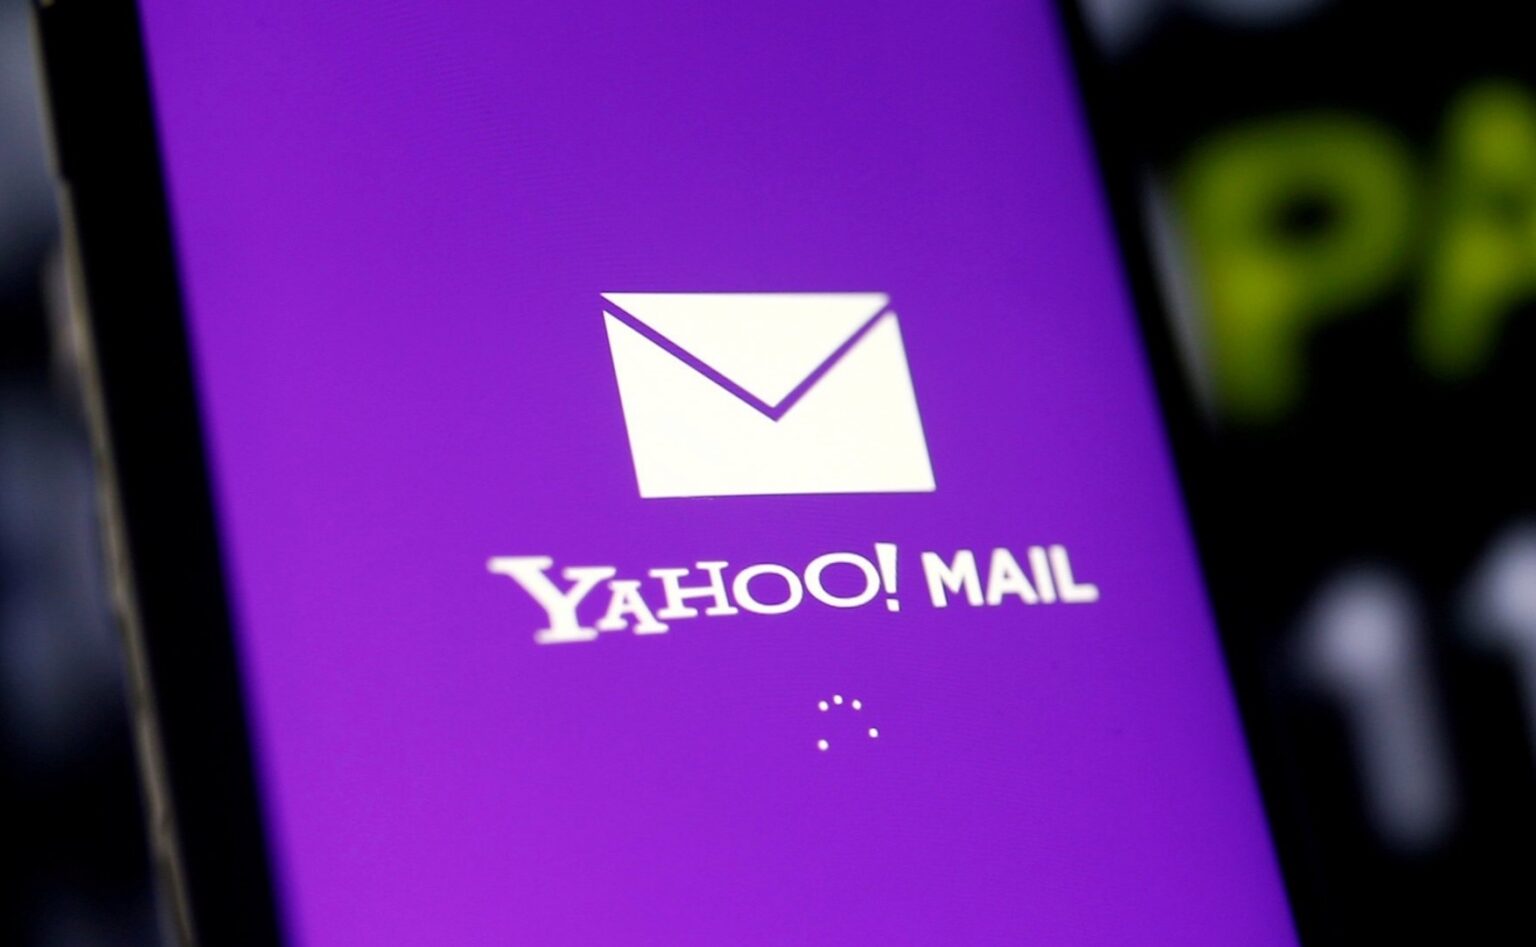 Why are My Contacts not Showing Up in Yahoo Mail